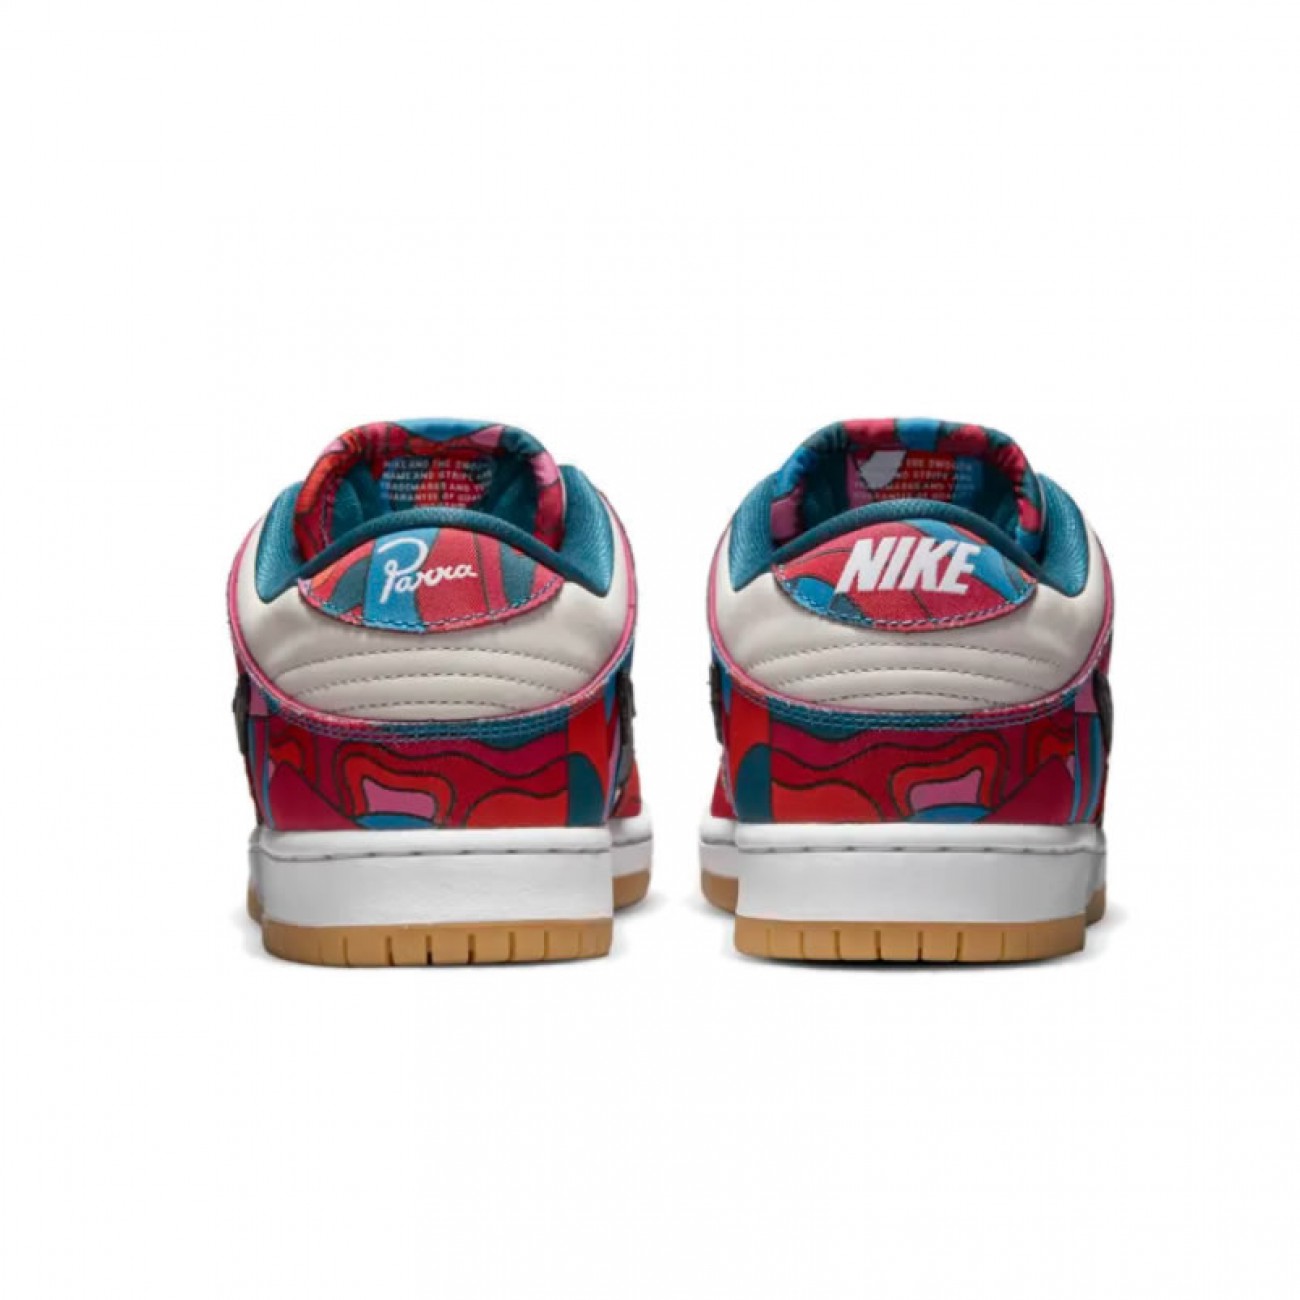 Parra X Nike SB Dunk Low "Abstract Art" 2021 DH7695-600